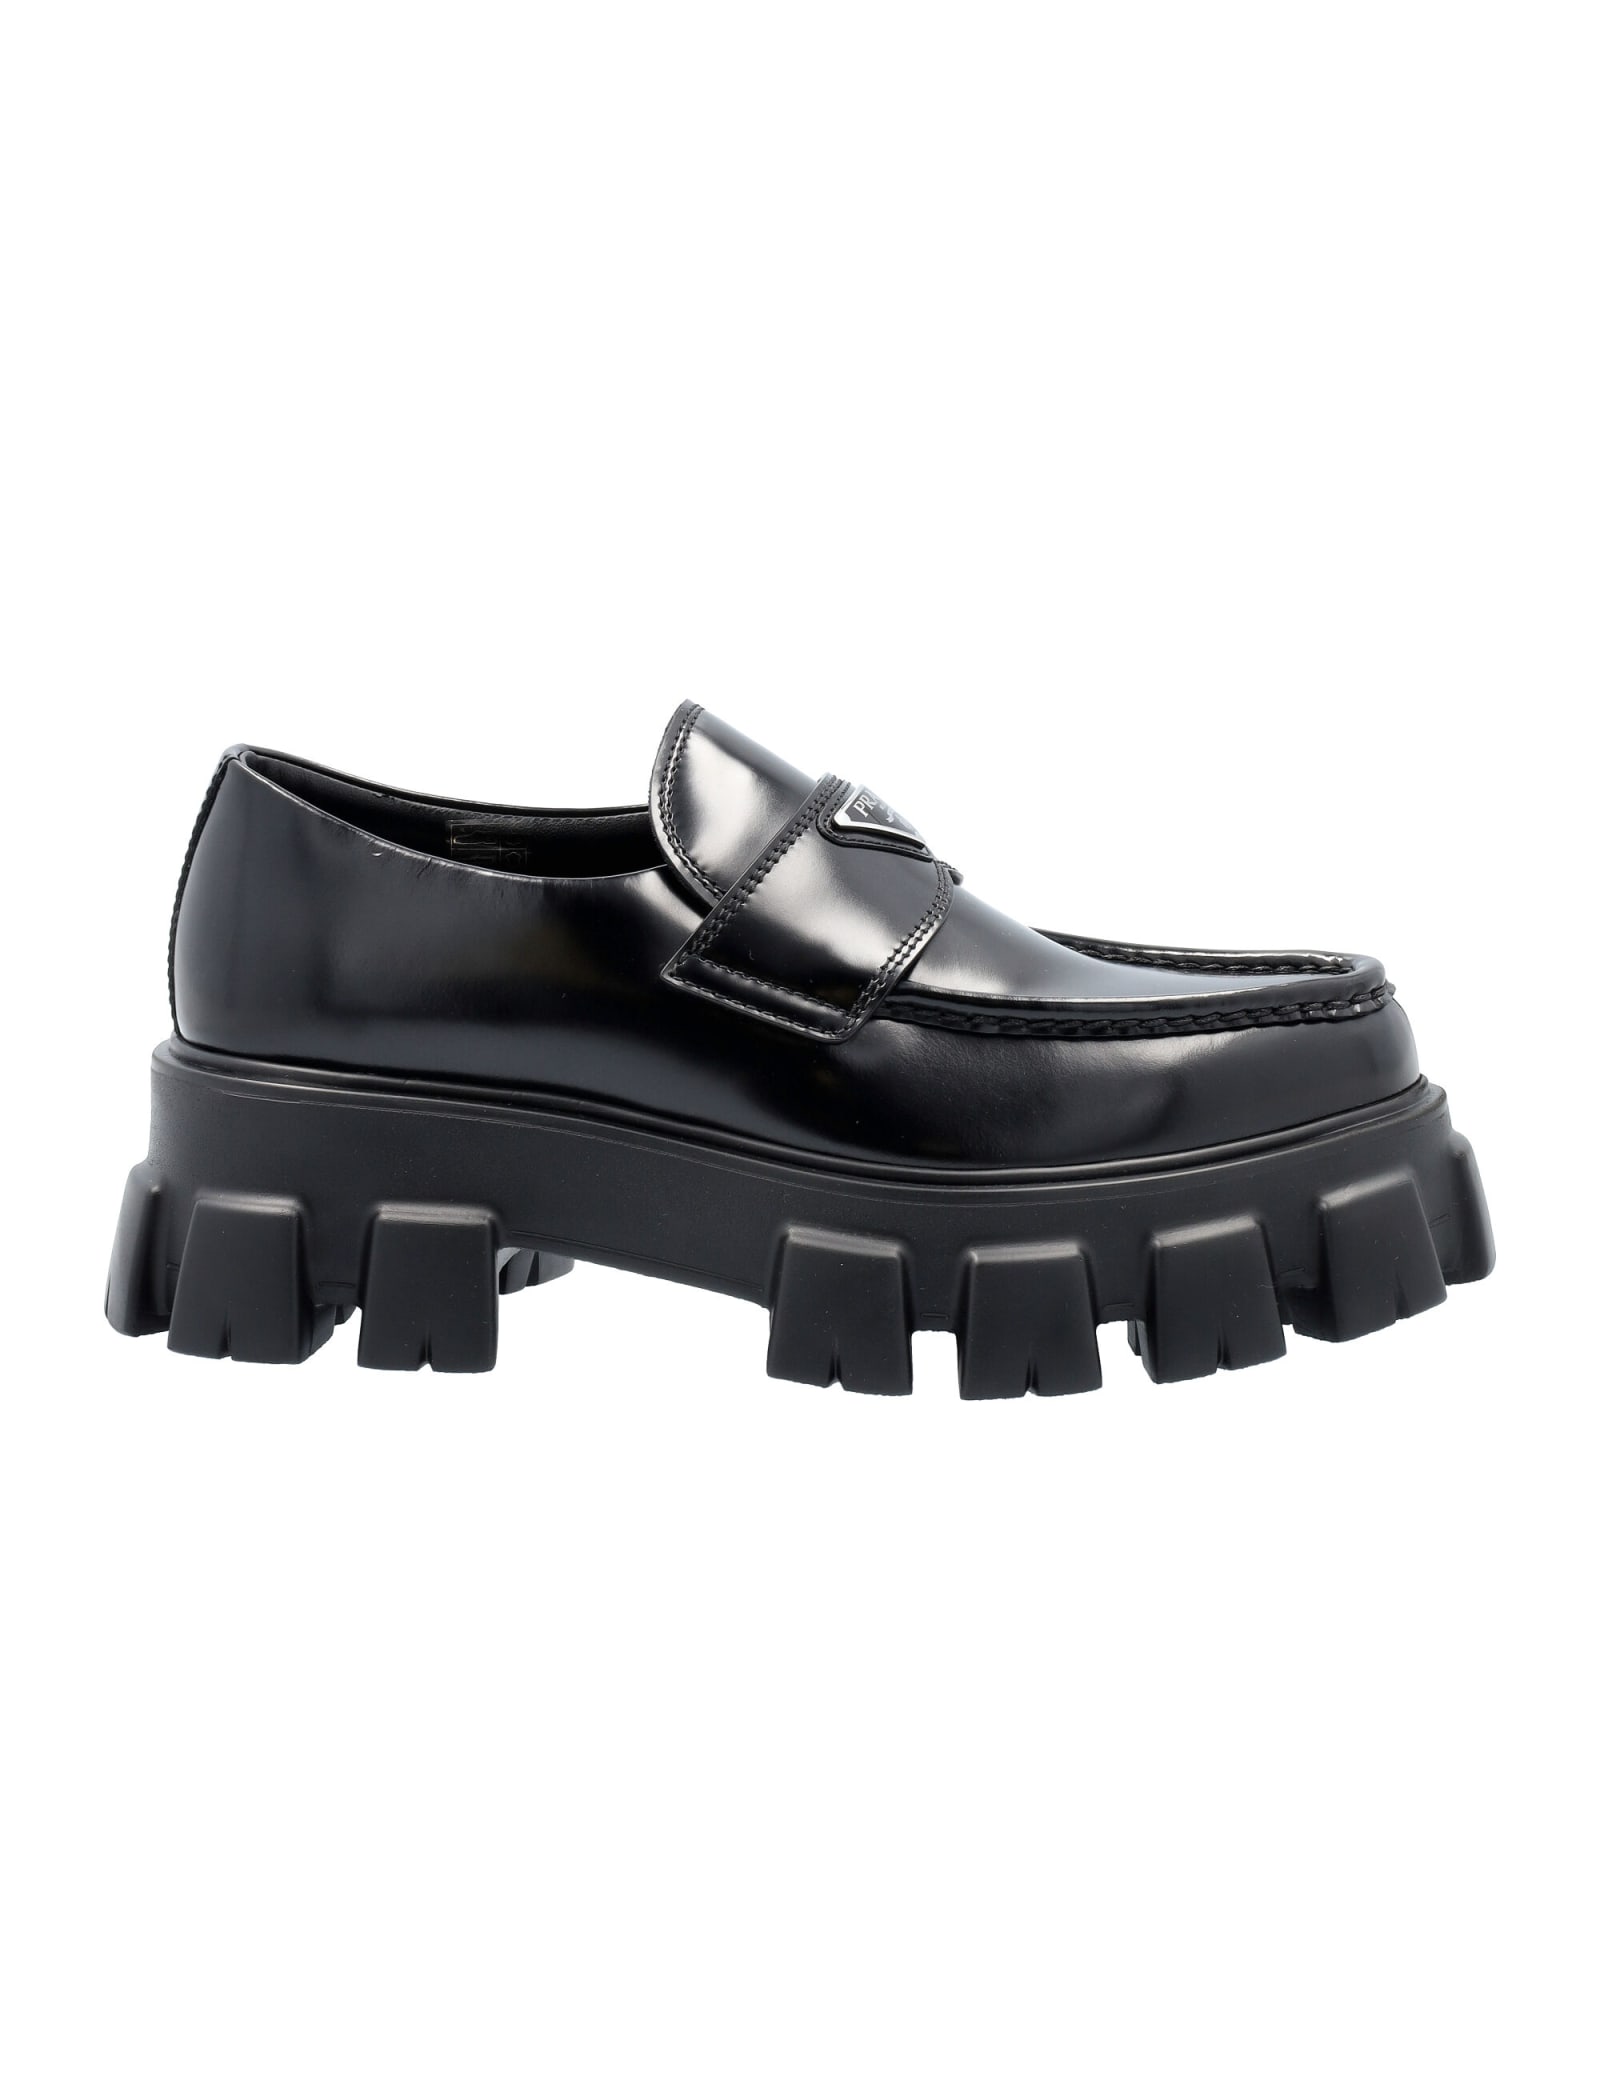 Prada Monolith Brushed Leather Loafers